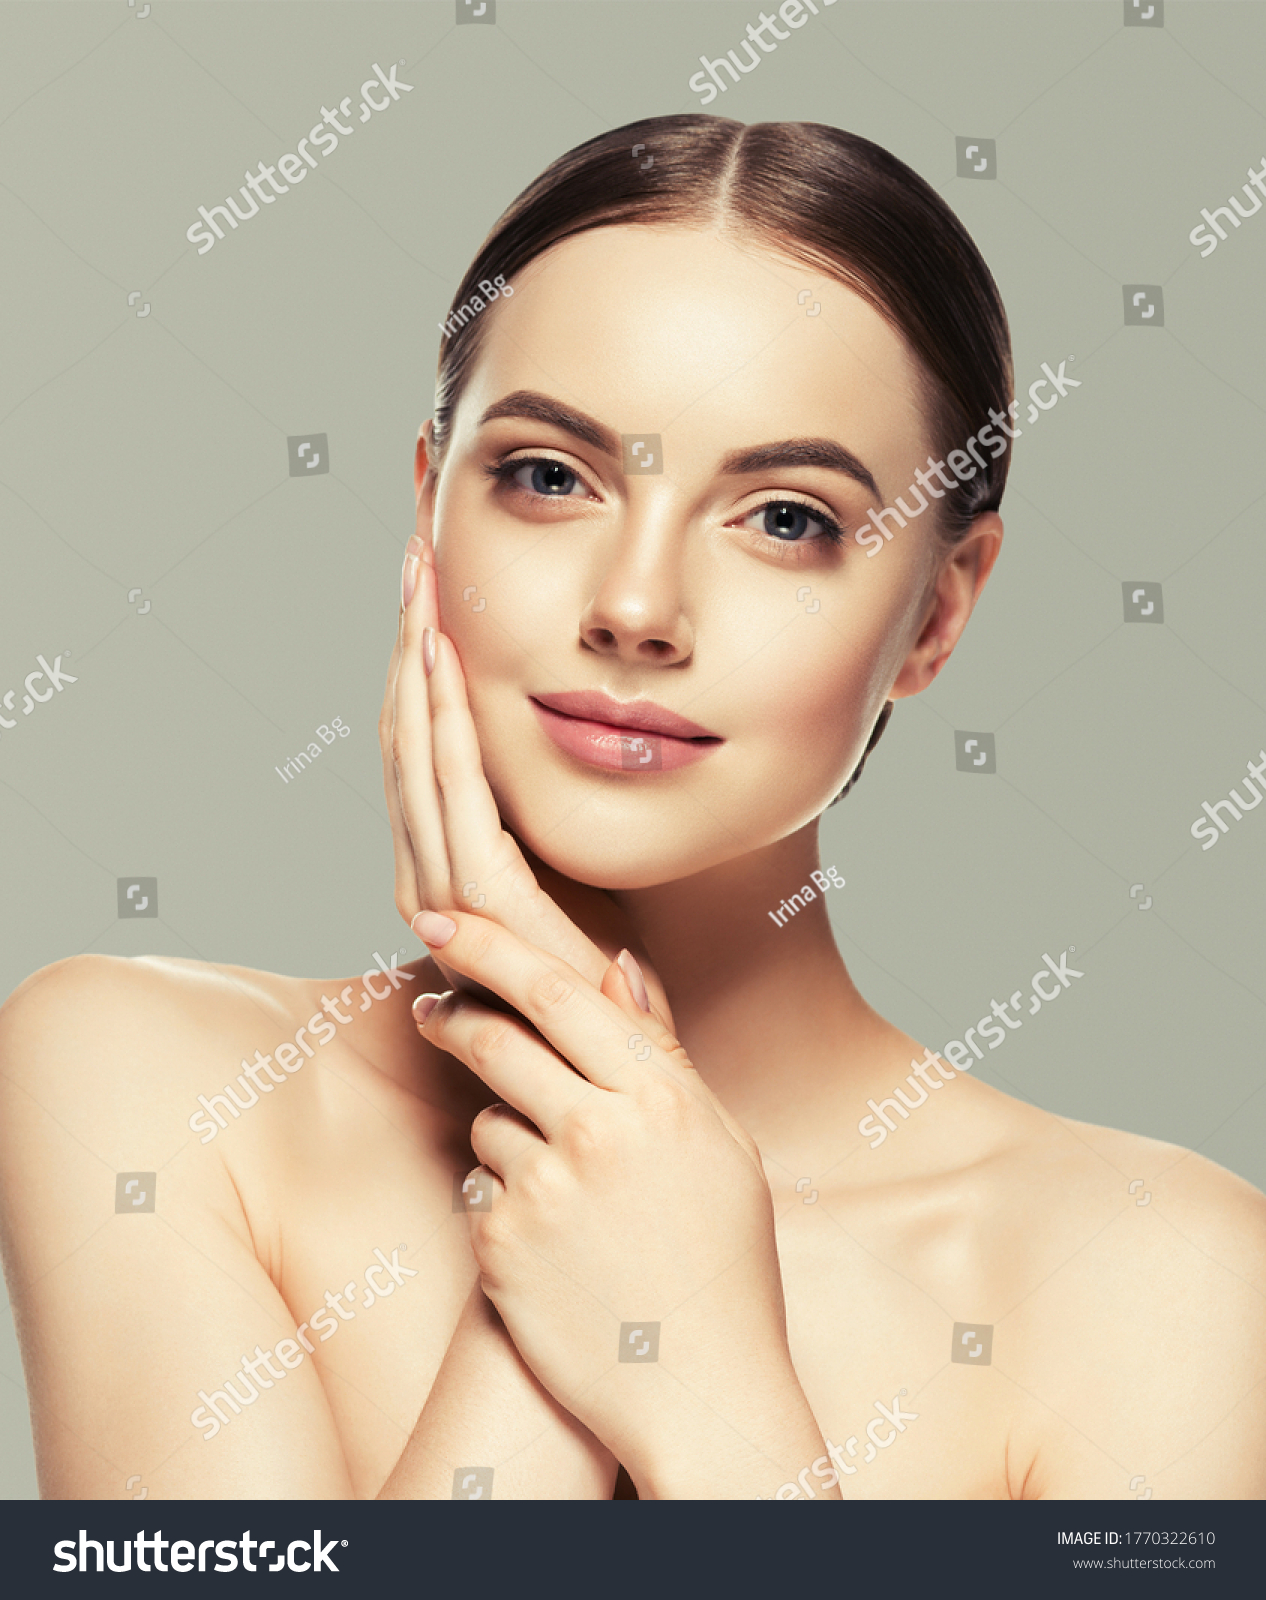 Woman face beauty hand touching   healthy skin natural makeup beautiful female gray background #1770322610